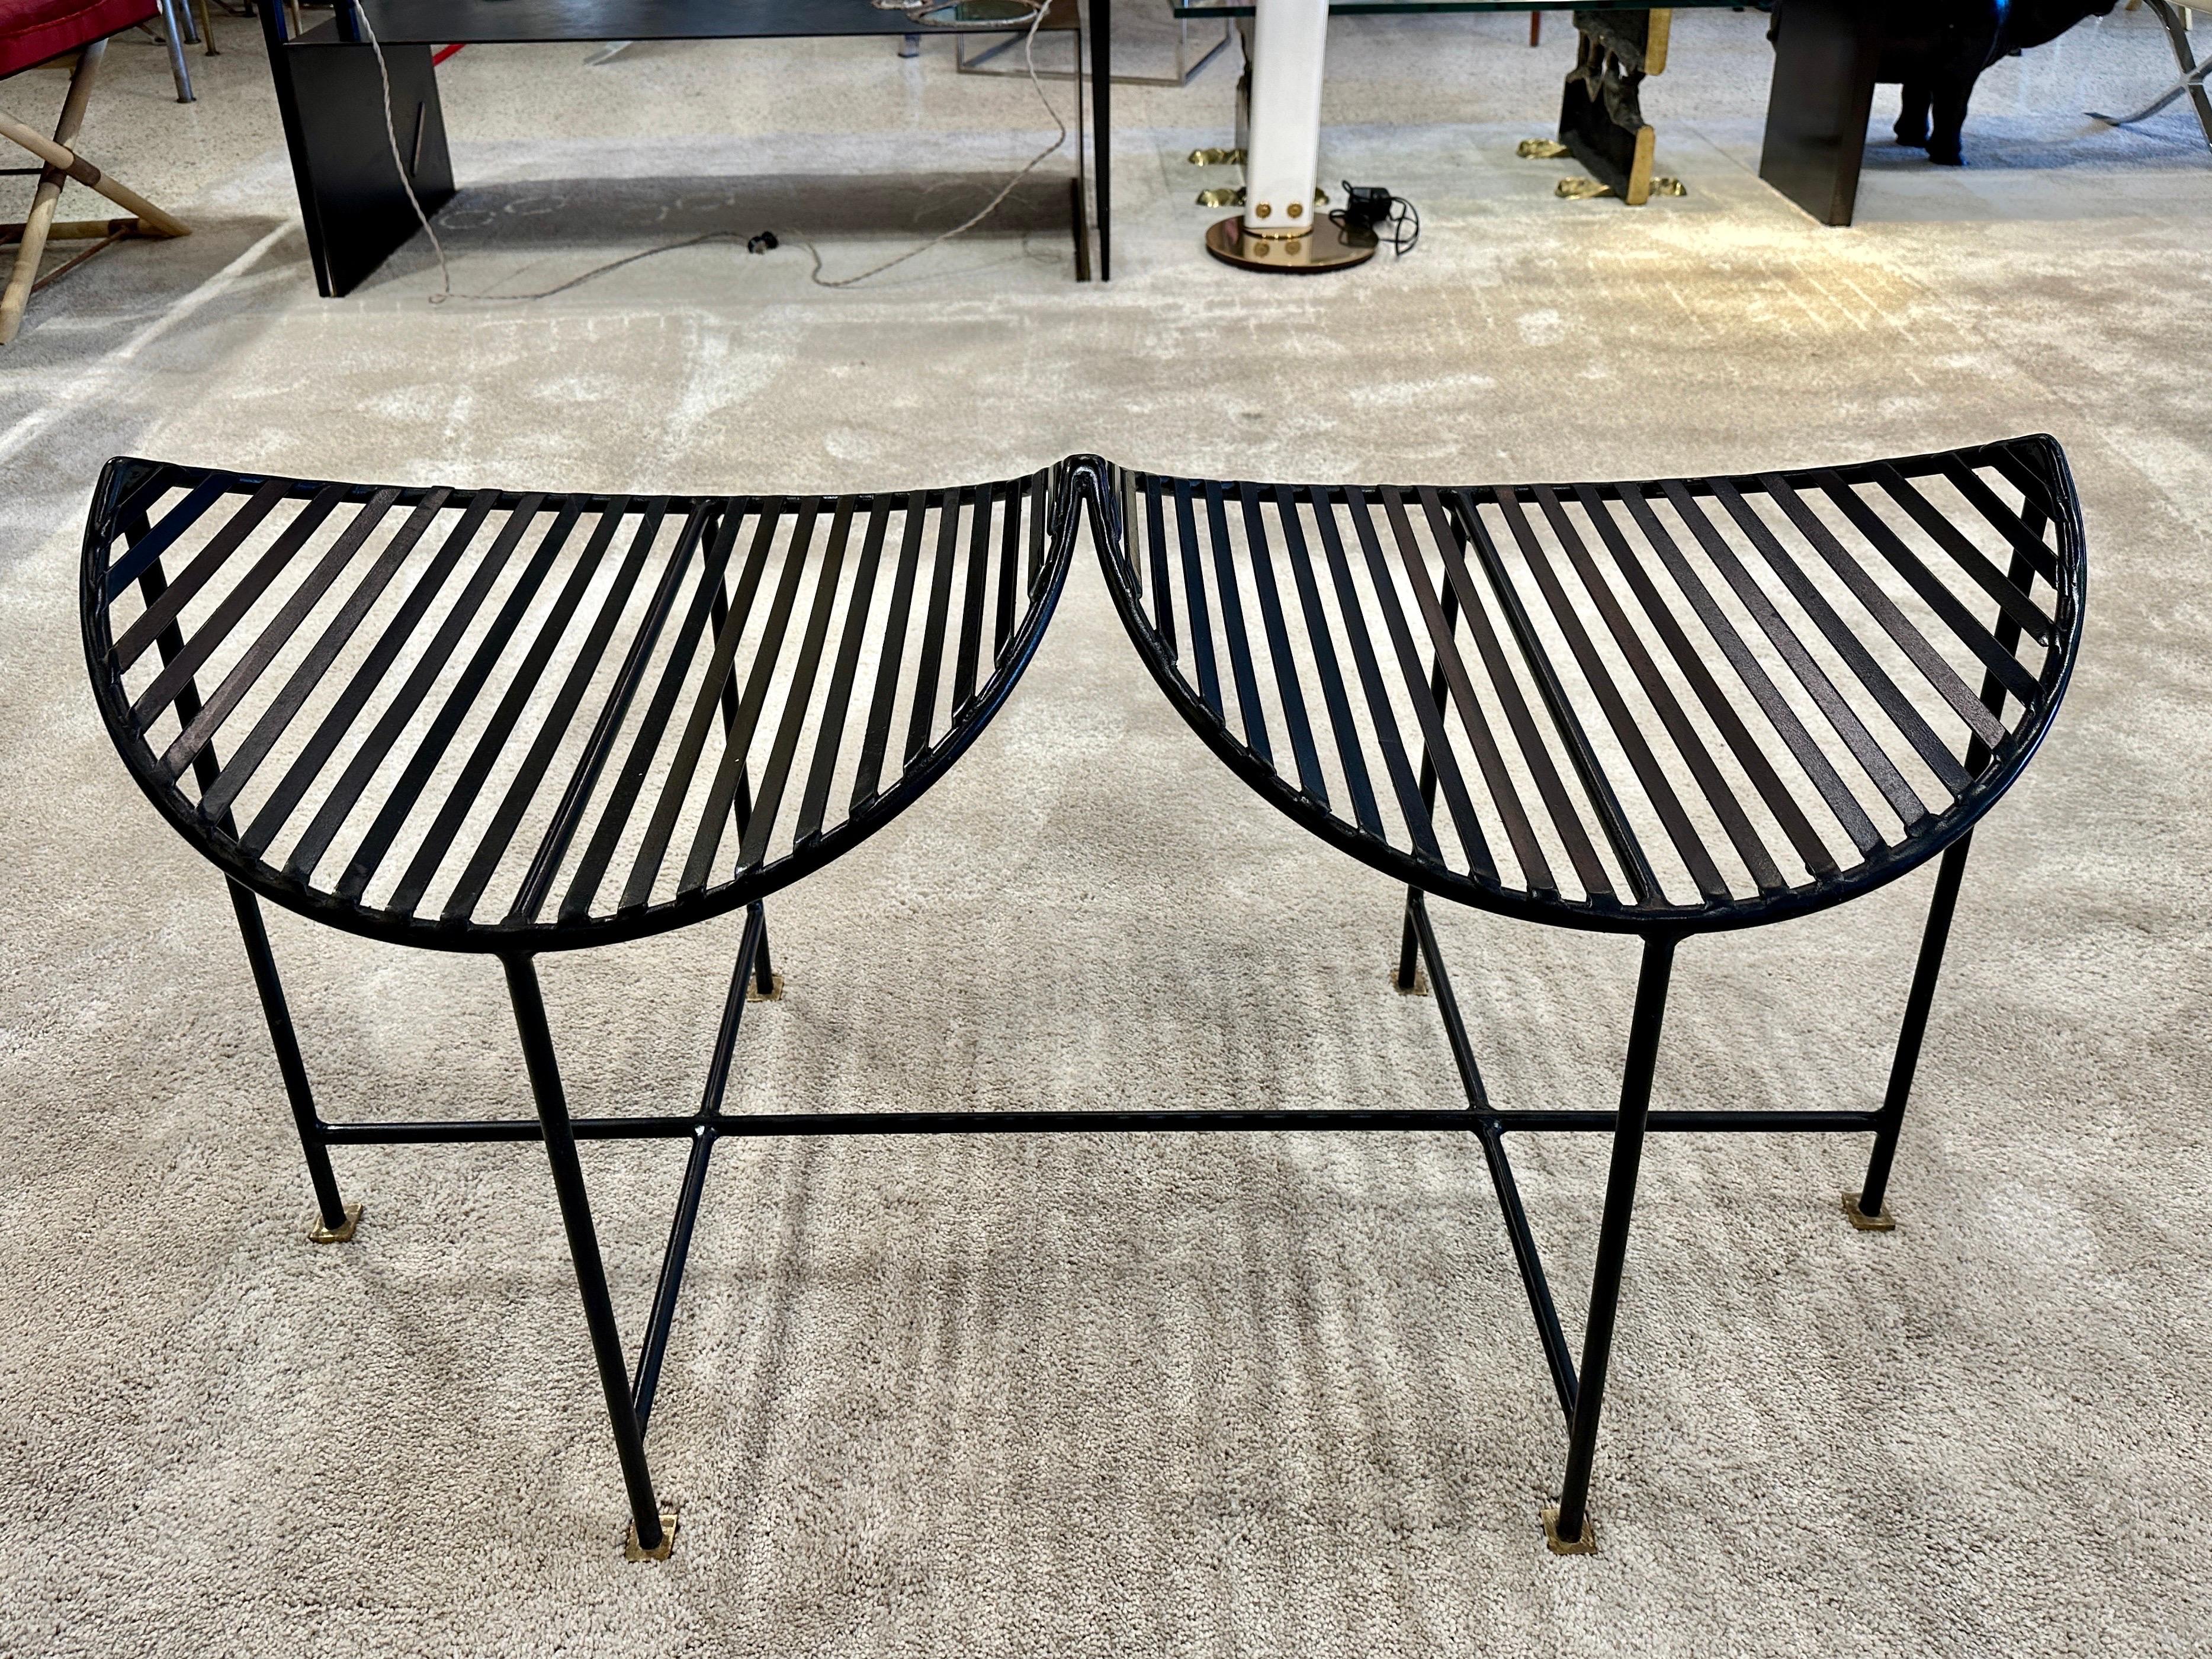 This wonderfully whimsical two-seat iron bench in black powder-coating and brass square feet, is a solid design element indoors or outdoors. The pictures are very accurate and the seats are VERY comfortable due to its curved design.  THIS ITEM IS